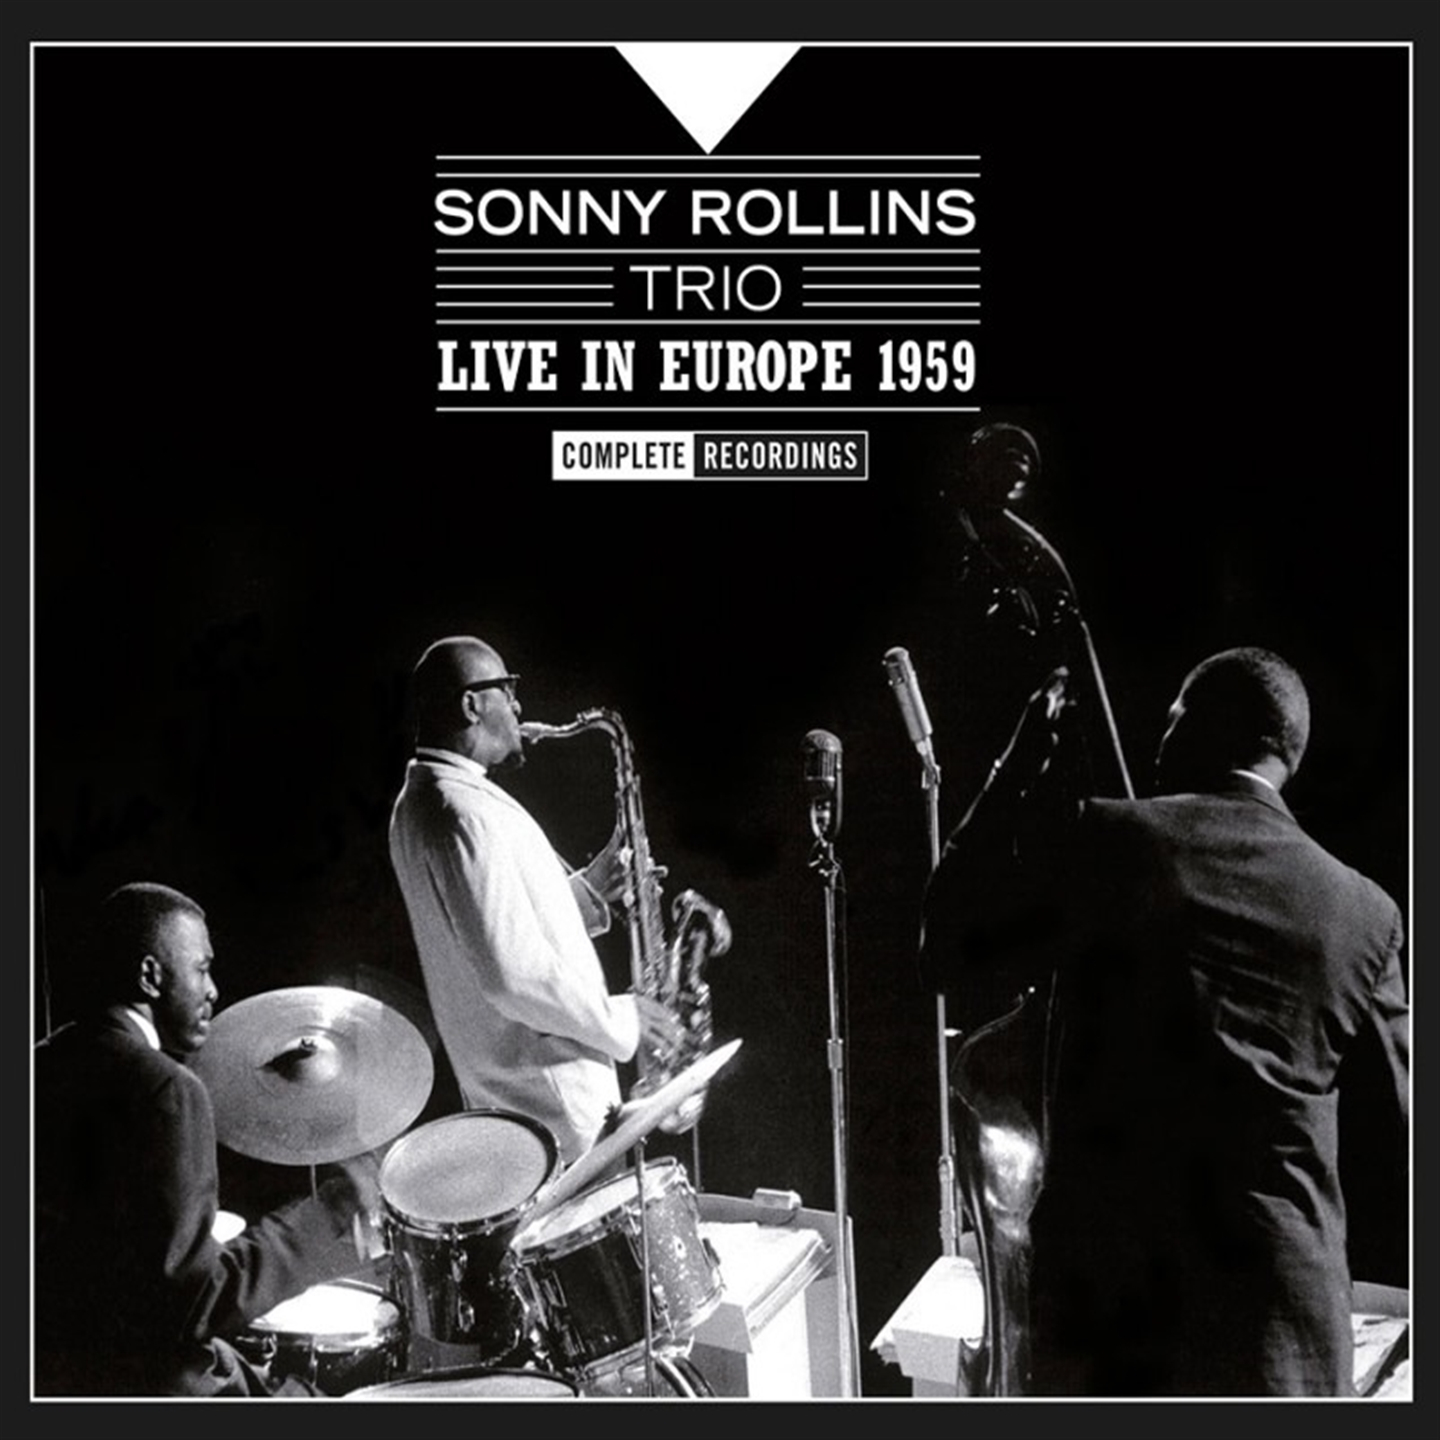 LIVE IN EUROPE 1959 - COMPLETE RECORDINGS [3 CD]